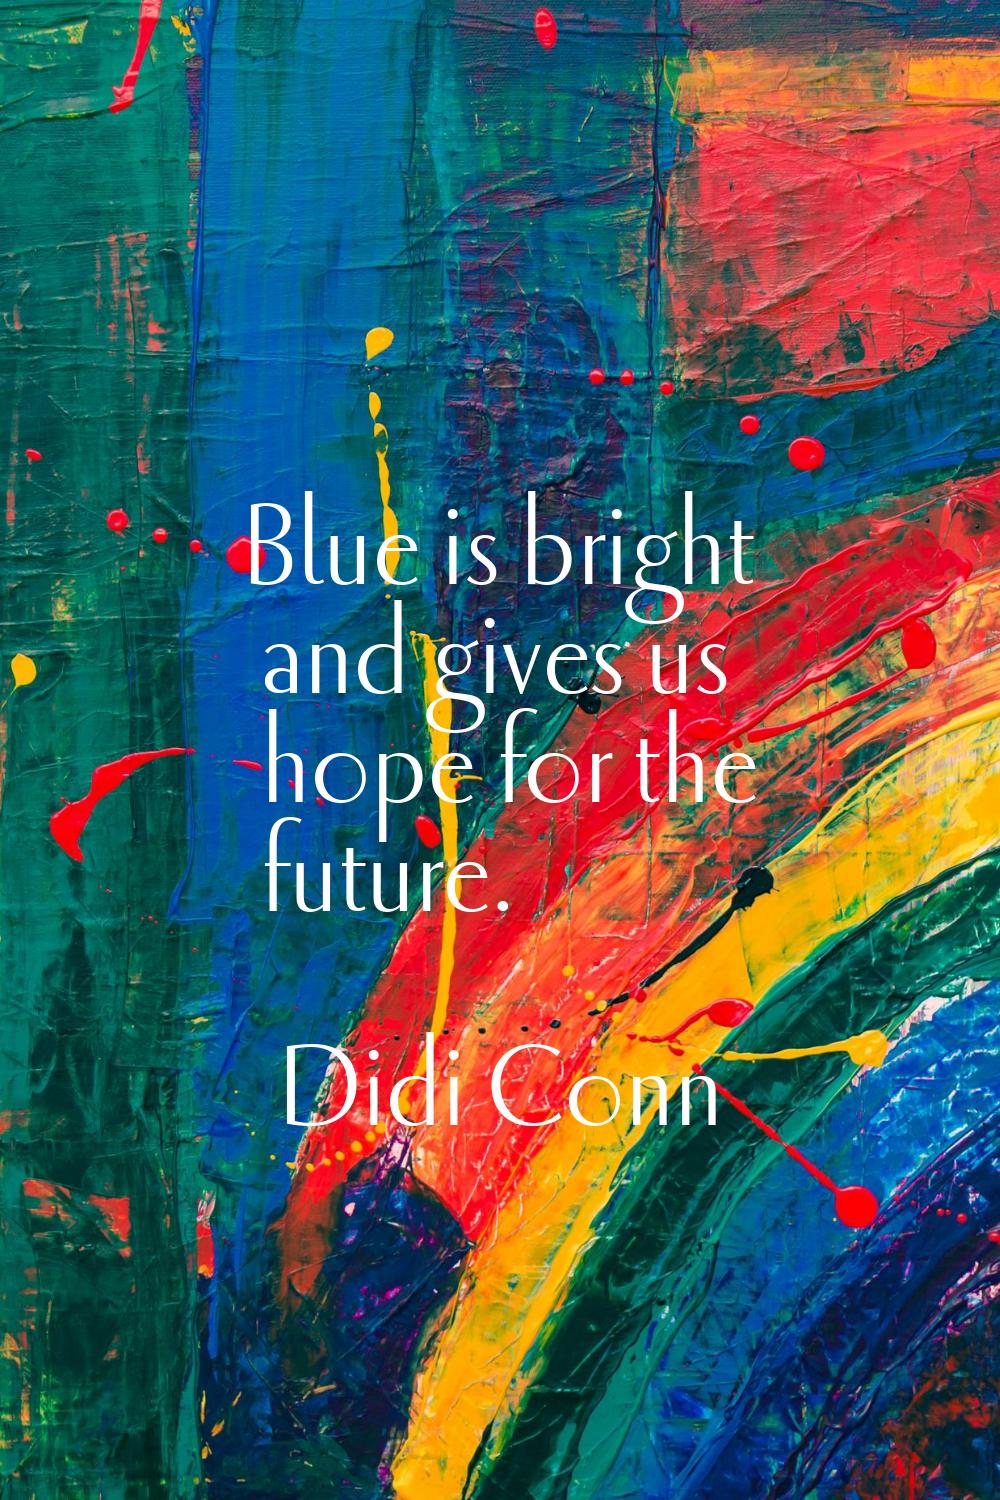 Blue is bright and gives us hope for the future.